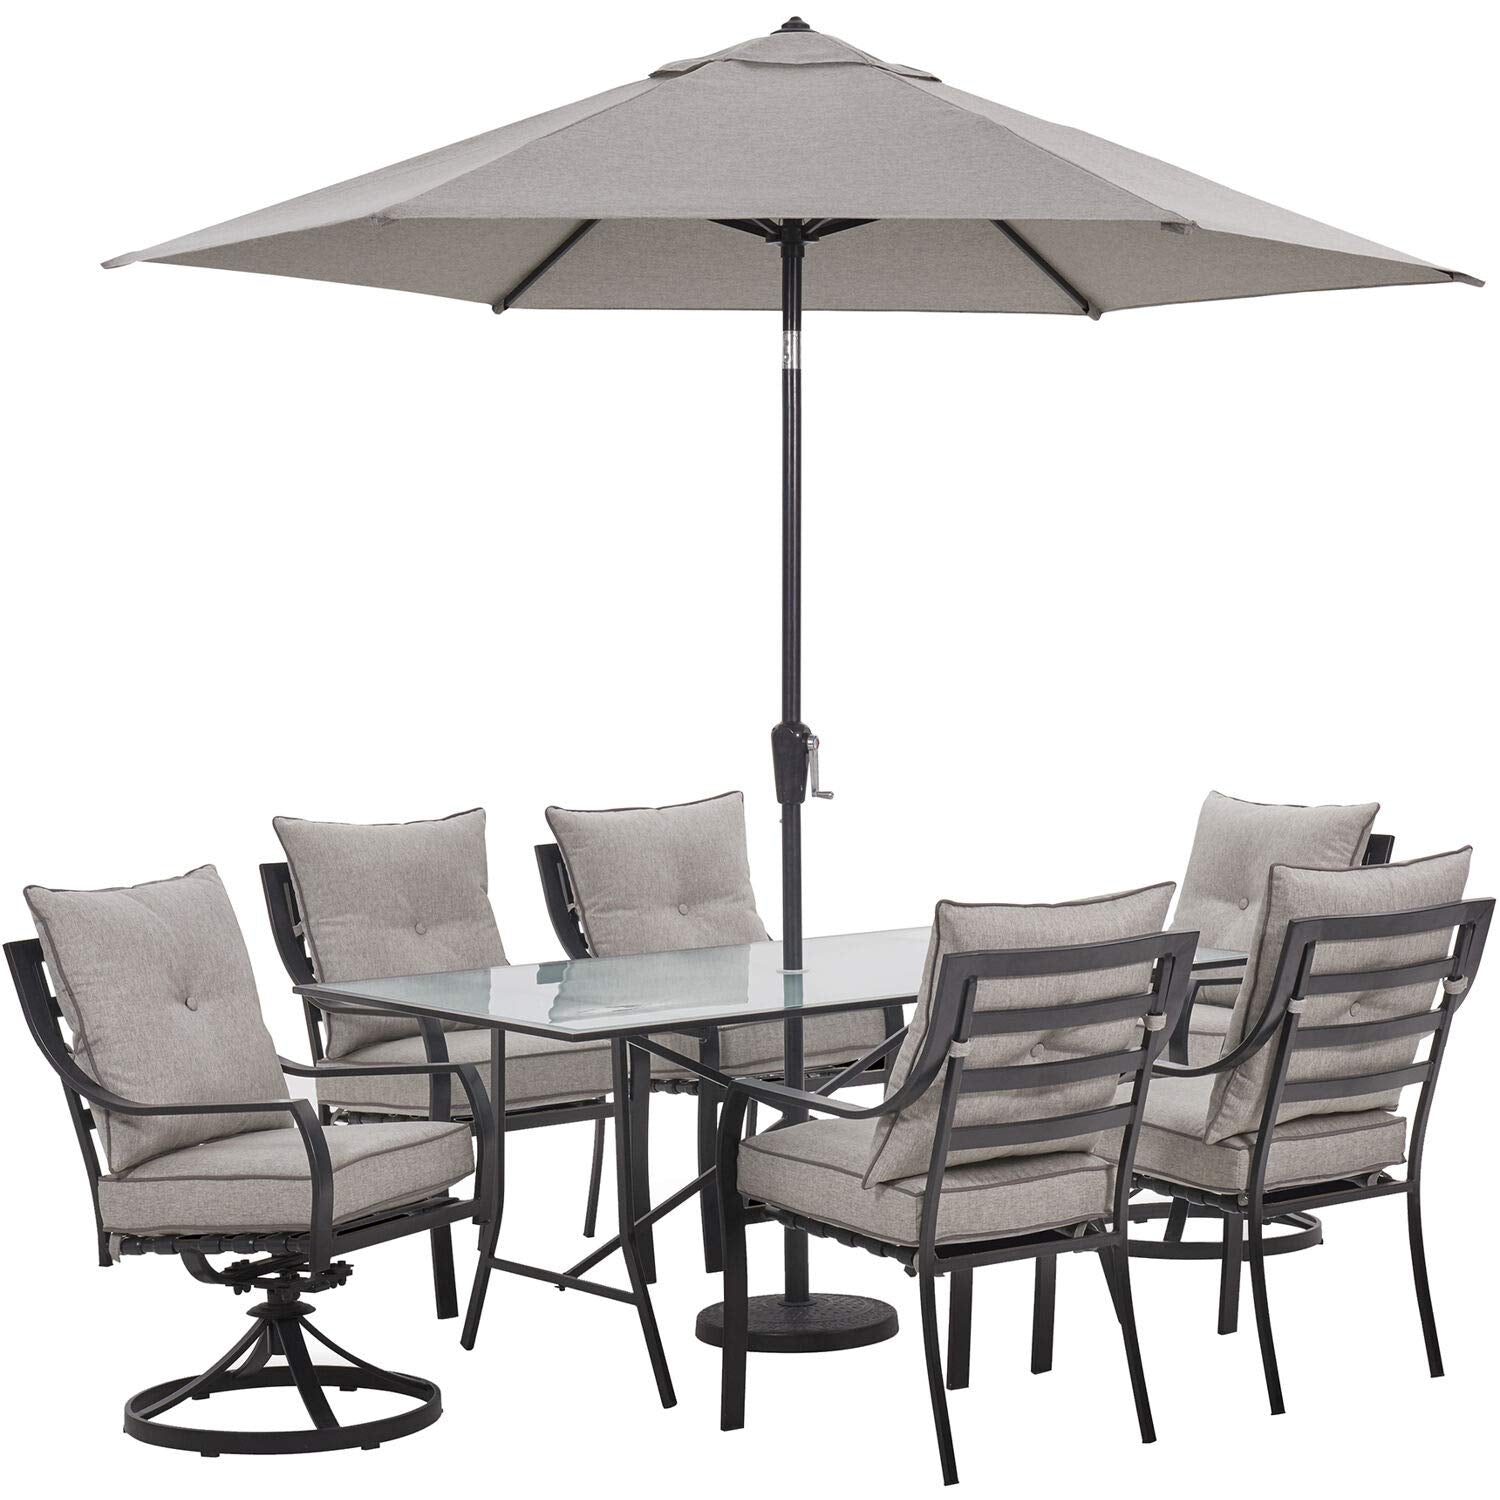 Hanover Lavallette 7-Piece Modern Outdoor Dining Set with Umbrella | 6 Cushioned Swivel Rocker Chairs | 66'' x 38'' Glass-Top Table | Weather Resistant Frame | Silver |LAVDN7PCSW-SLV-SU